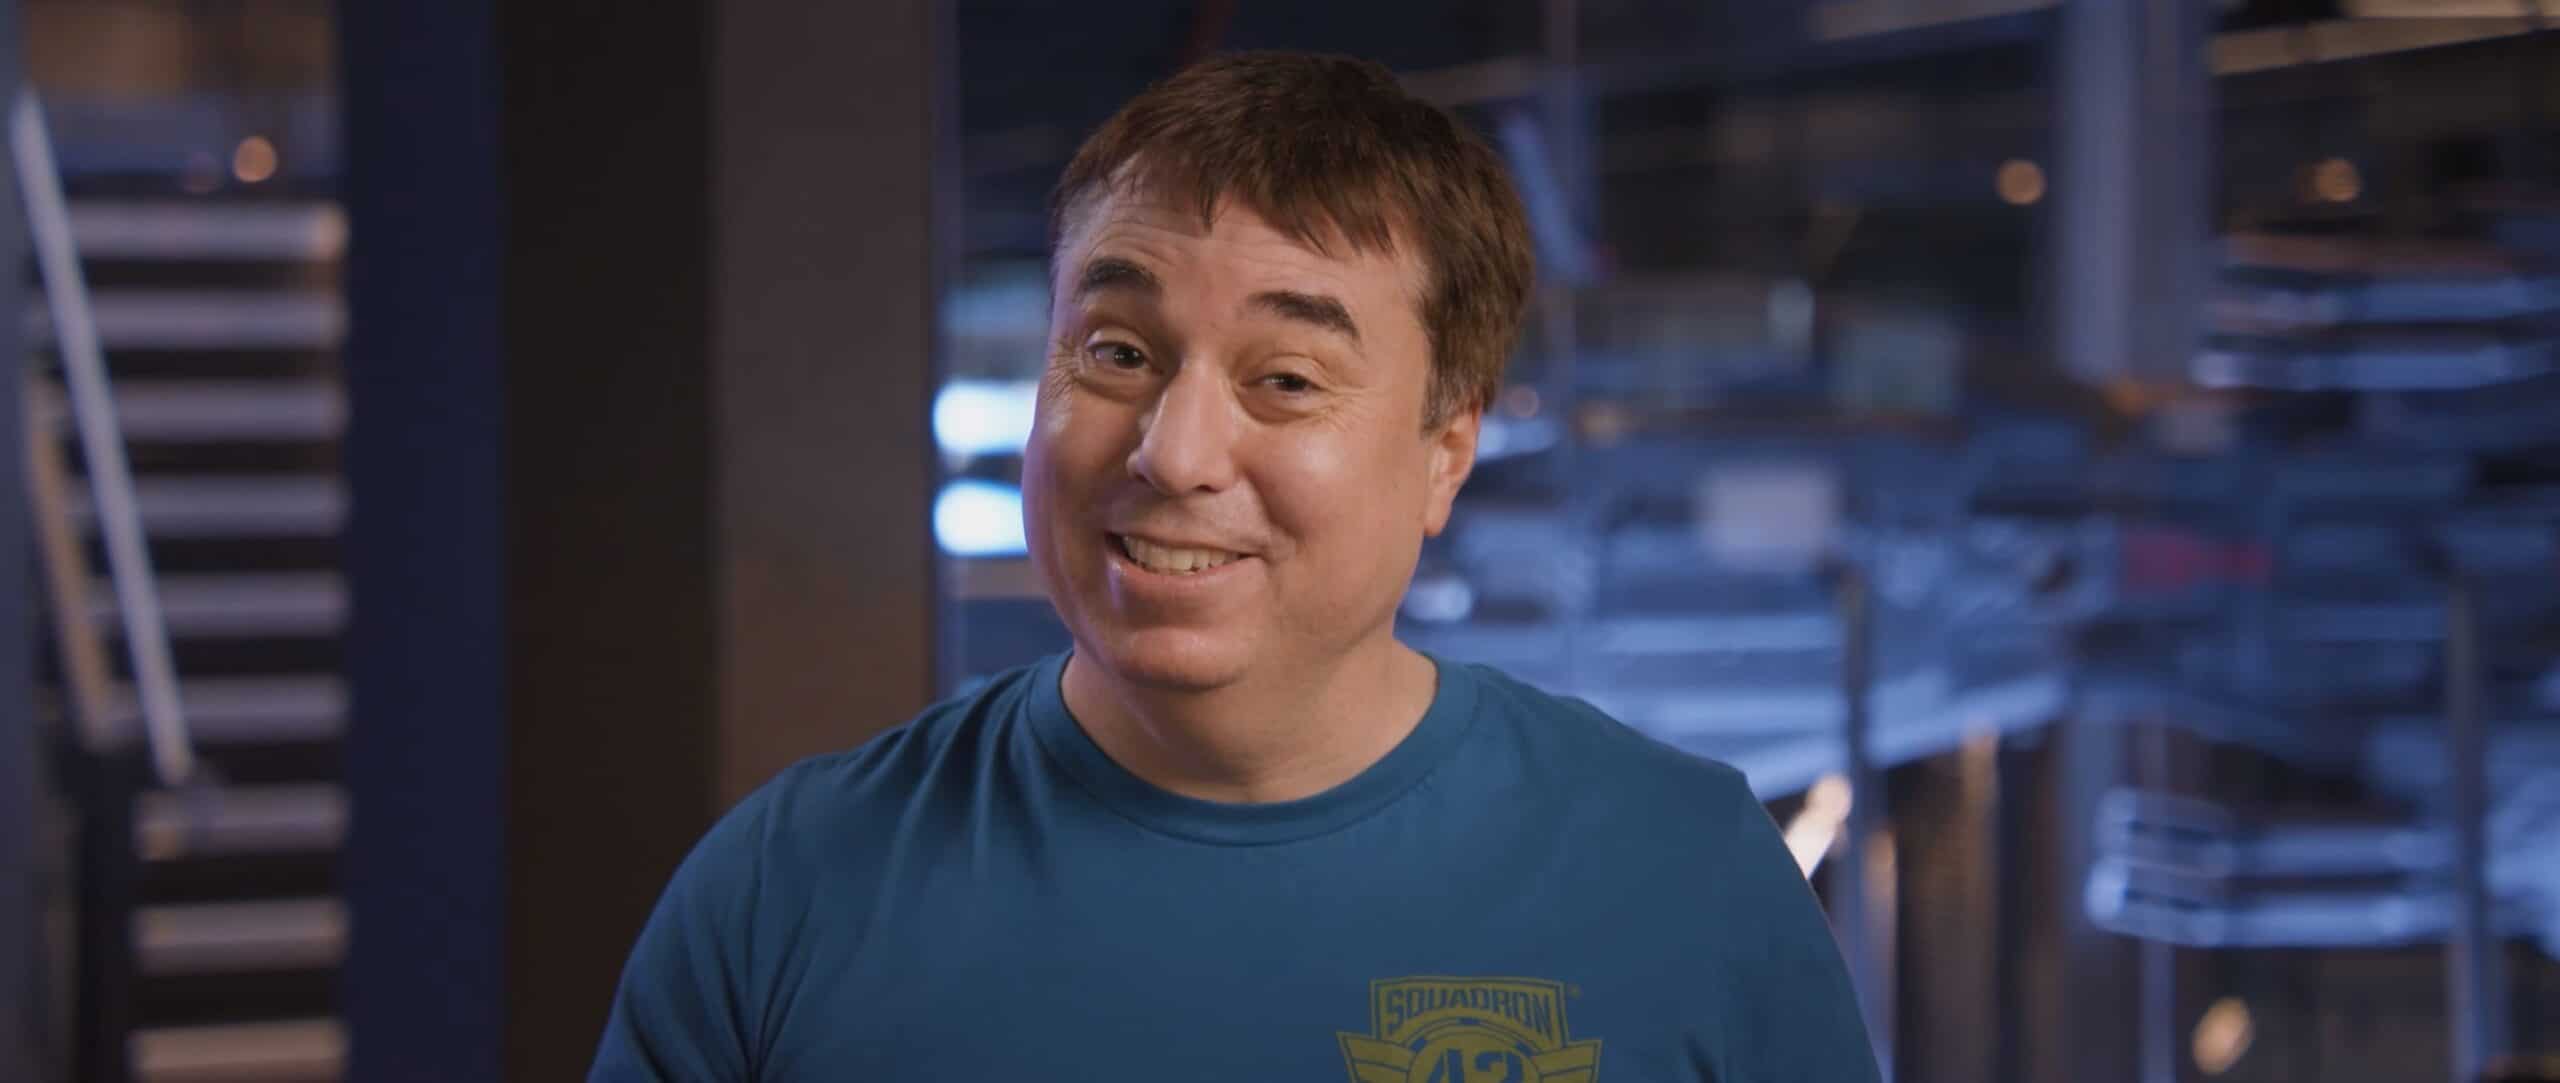 Star Citizen' and 'Squadron 42' are still years from launch